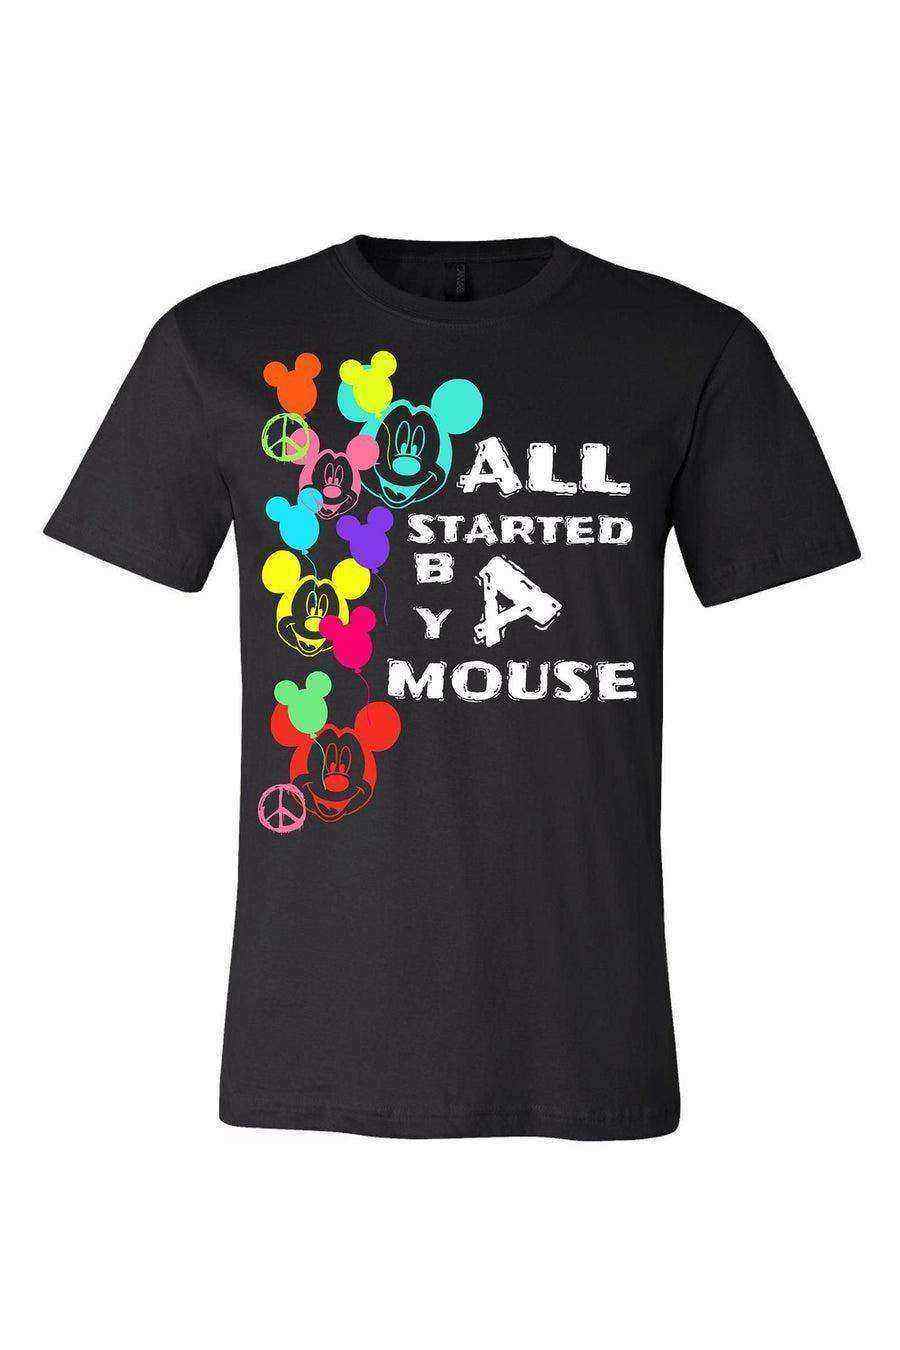 Womens | All Started By A Mouse Shirt | Mickey Balloons Shirt - Dylan's Tees